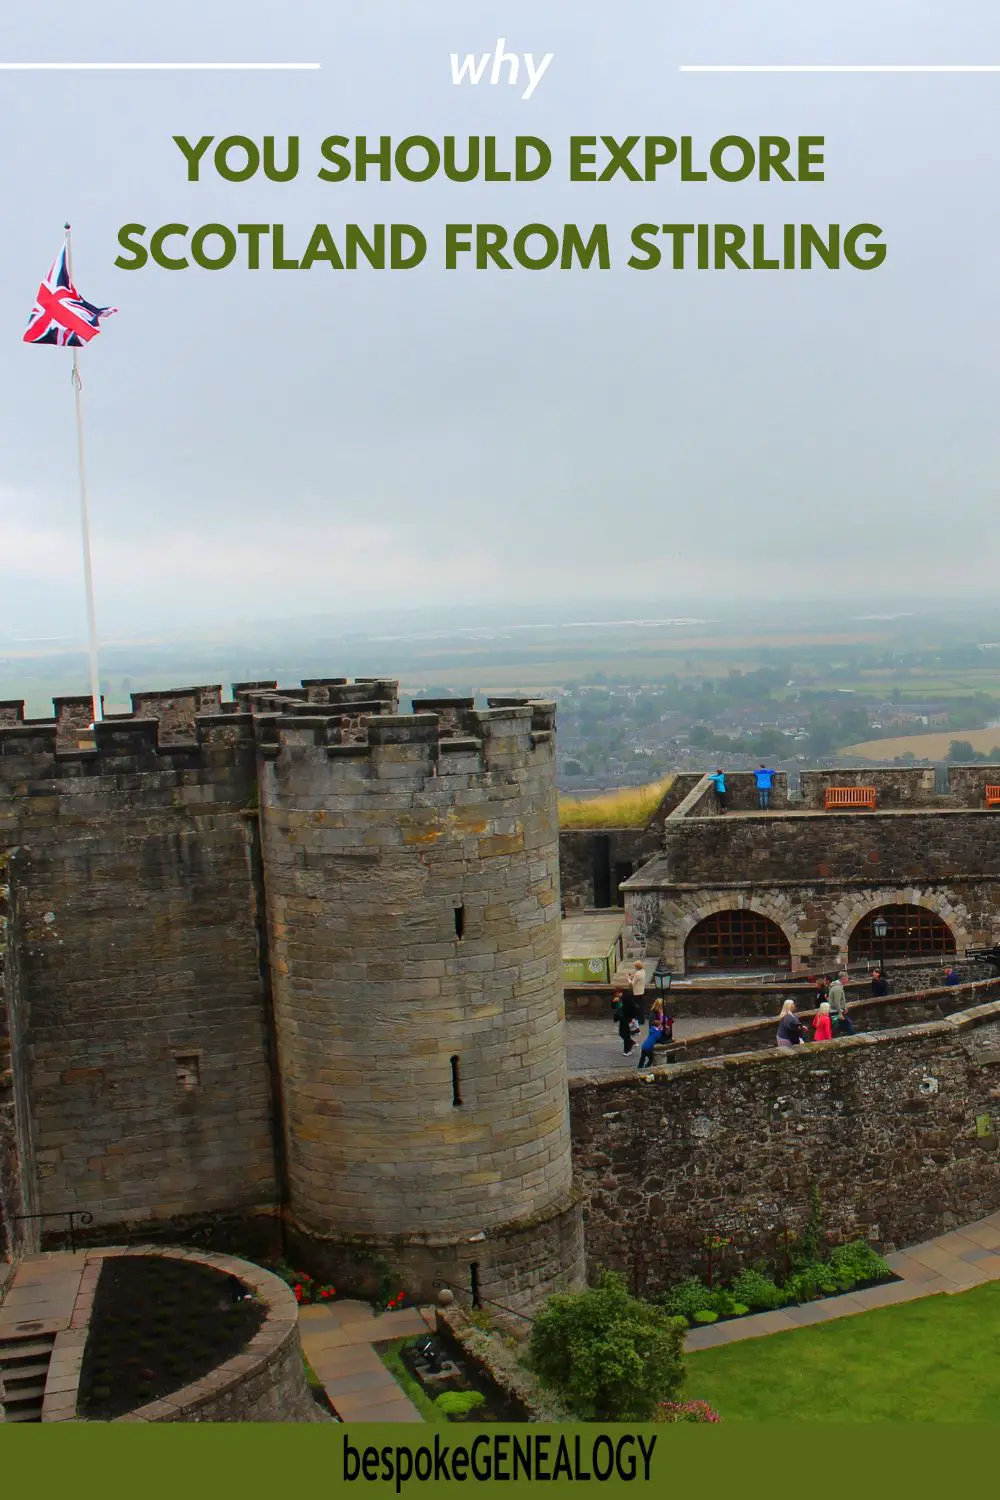 Why you should explore Scotland from Stirling. Photo of part of Stirling Castle and the view beyond.